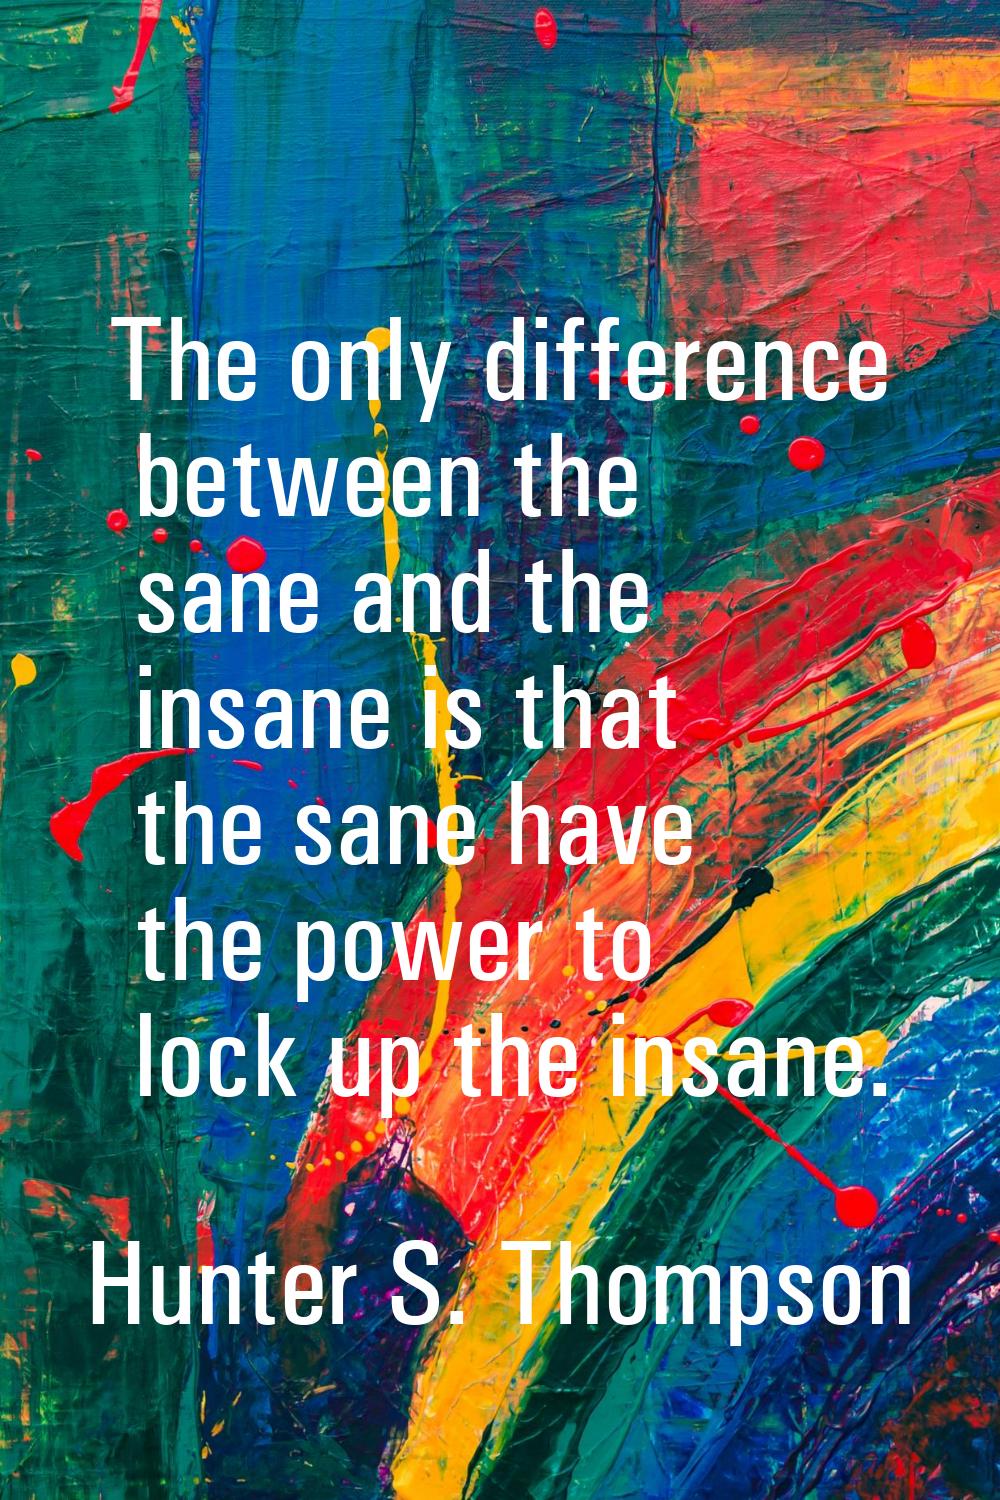 The only difference between the sane and the insane is that the sane have the power to lock up the 